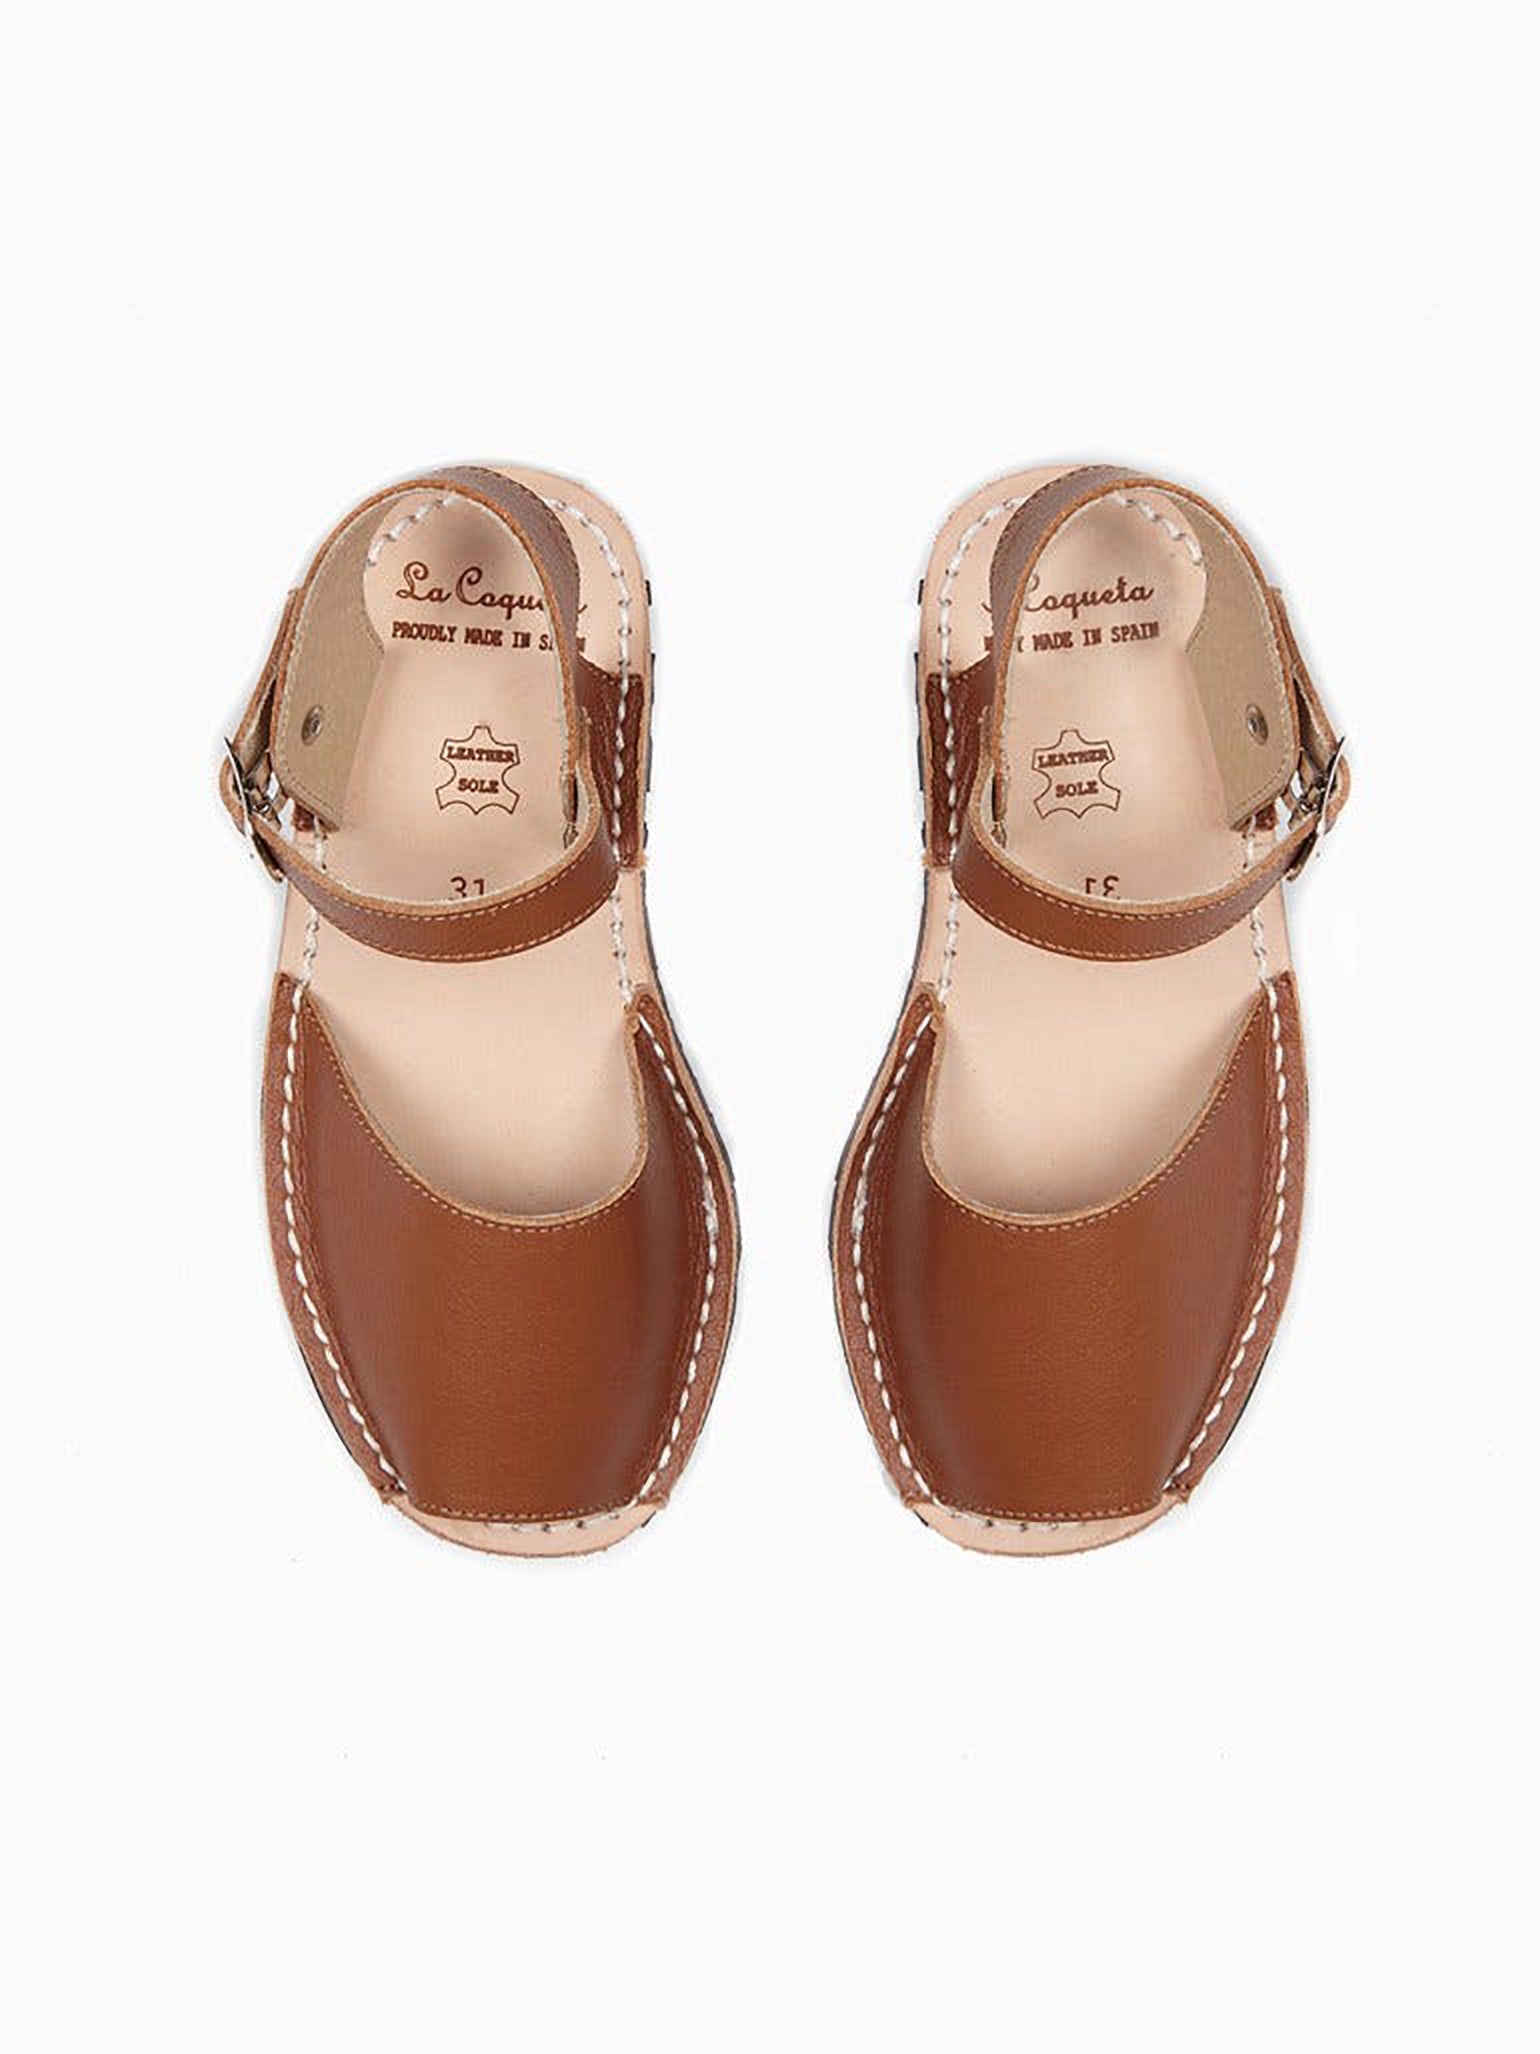 Image of Tan Leather Avarca Leather Kids Sandals